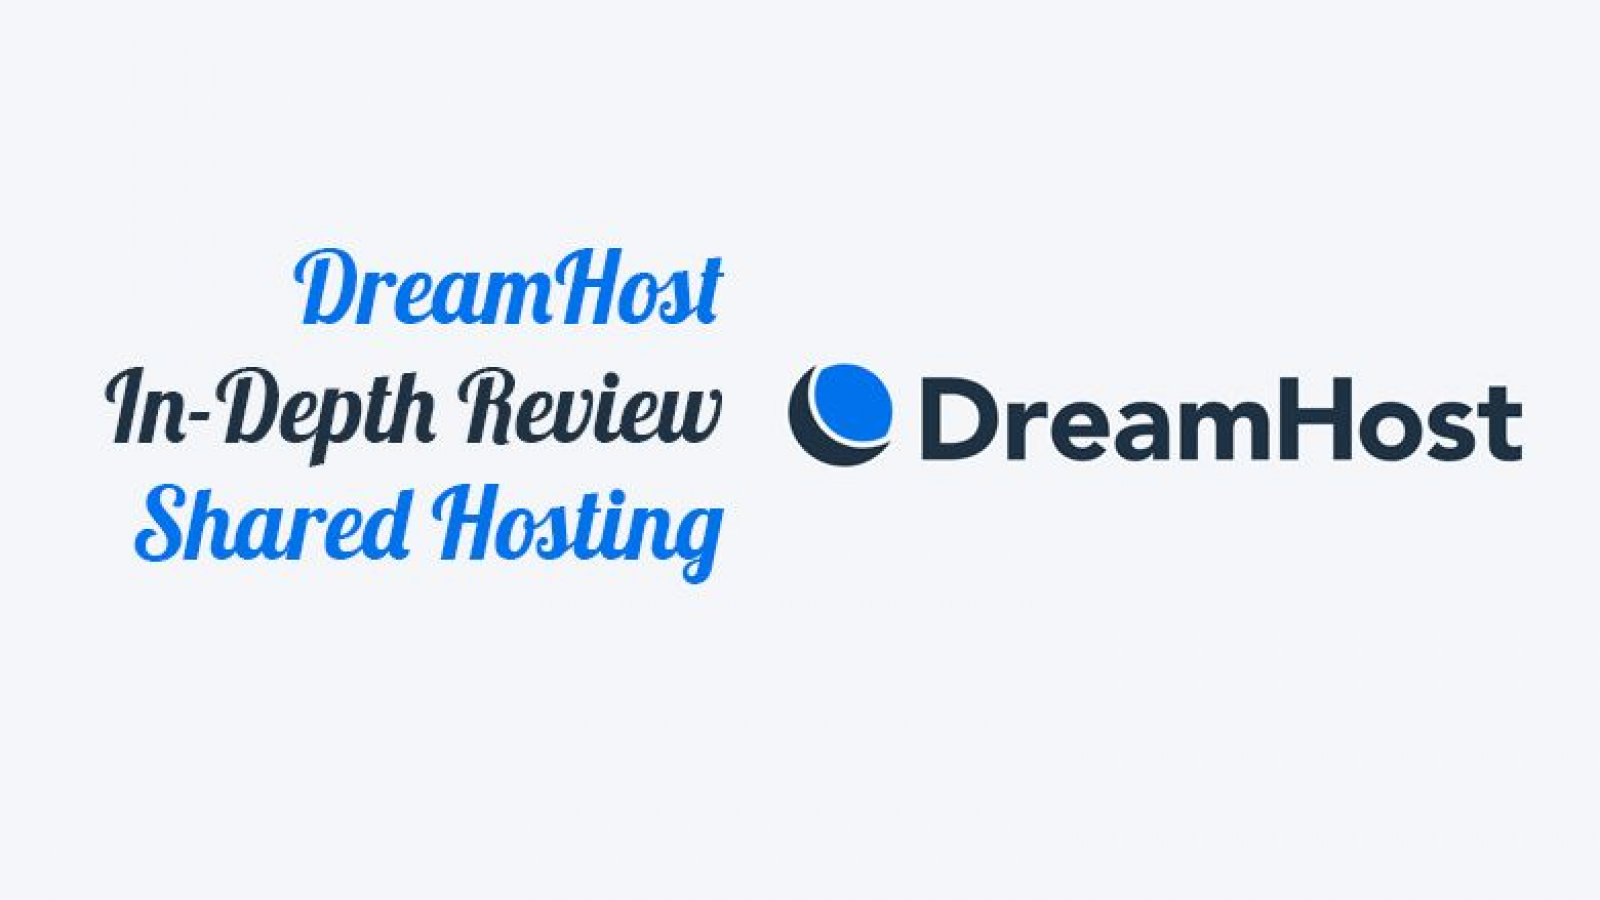 dreamhost-in-depth-review-shared-hosting-edition-featured-compressed